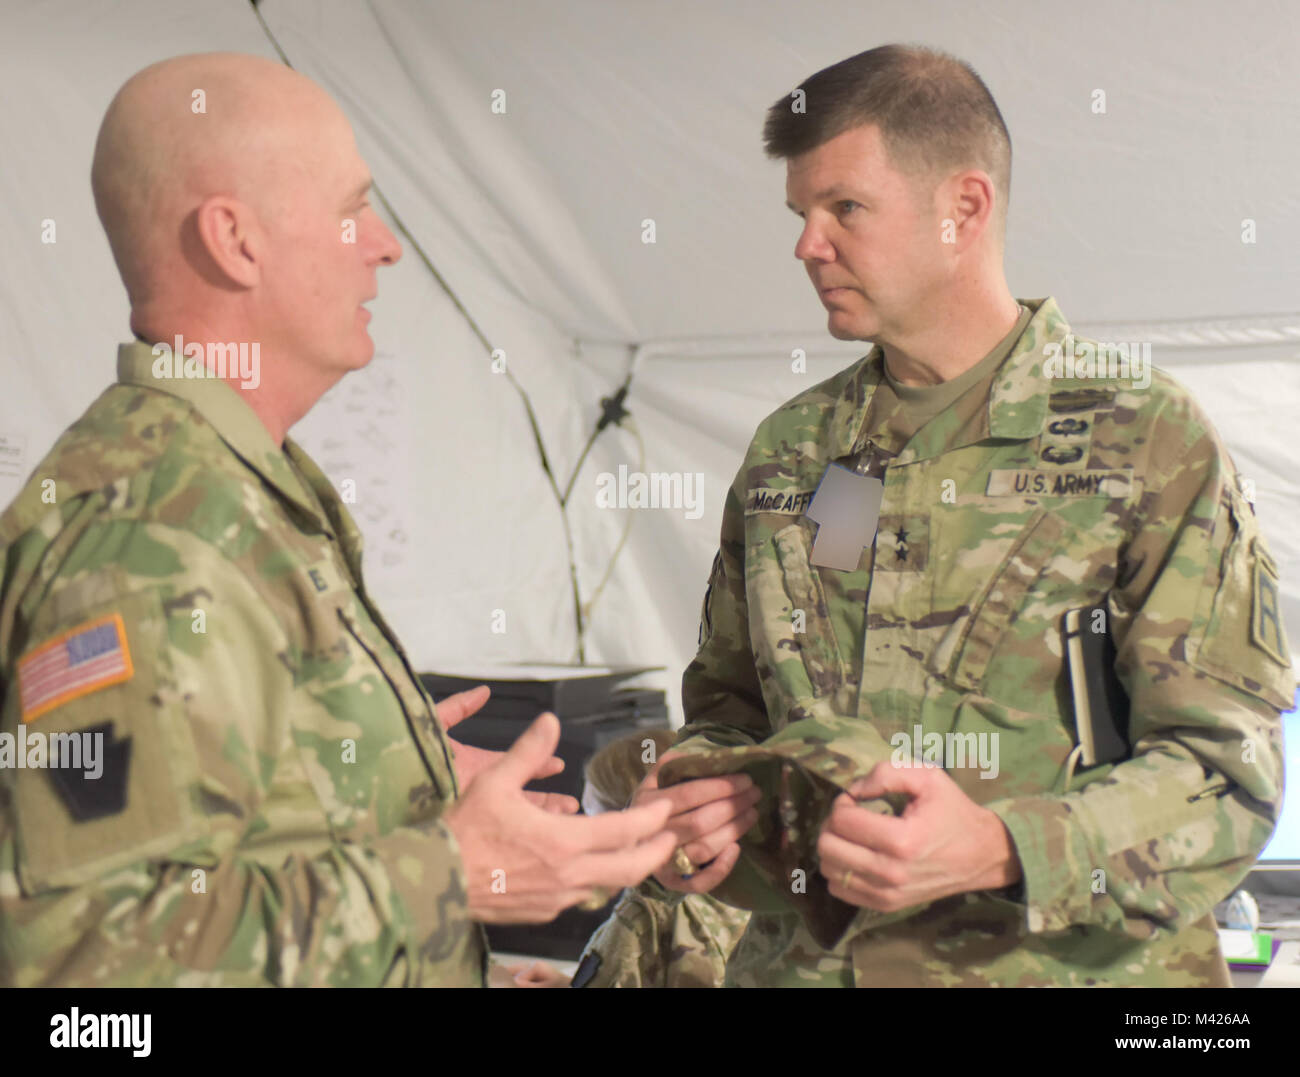 Maj. Gen. Todd McCaffrey (right), First Army Division East commanding general, talks with Command Sgt. Maj. John Jones, command sergeant major of the Pennsylvania Army National Guard's 28th Infantry Division, during the 28th ID's culminating training exercise at Fort Hood, Texas, Jan. 31, 2018. About 500 Soldiers in the Pennsylvania unit's headquarters are preparing to deploy to the Middle East. “(First Army personnel) have been very helpful assisting us on our way to deployment and with the validation process,” Jones said. (Photo altered for security purposes.) Stock Photo